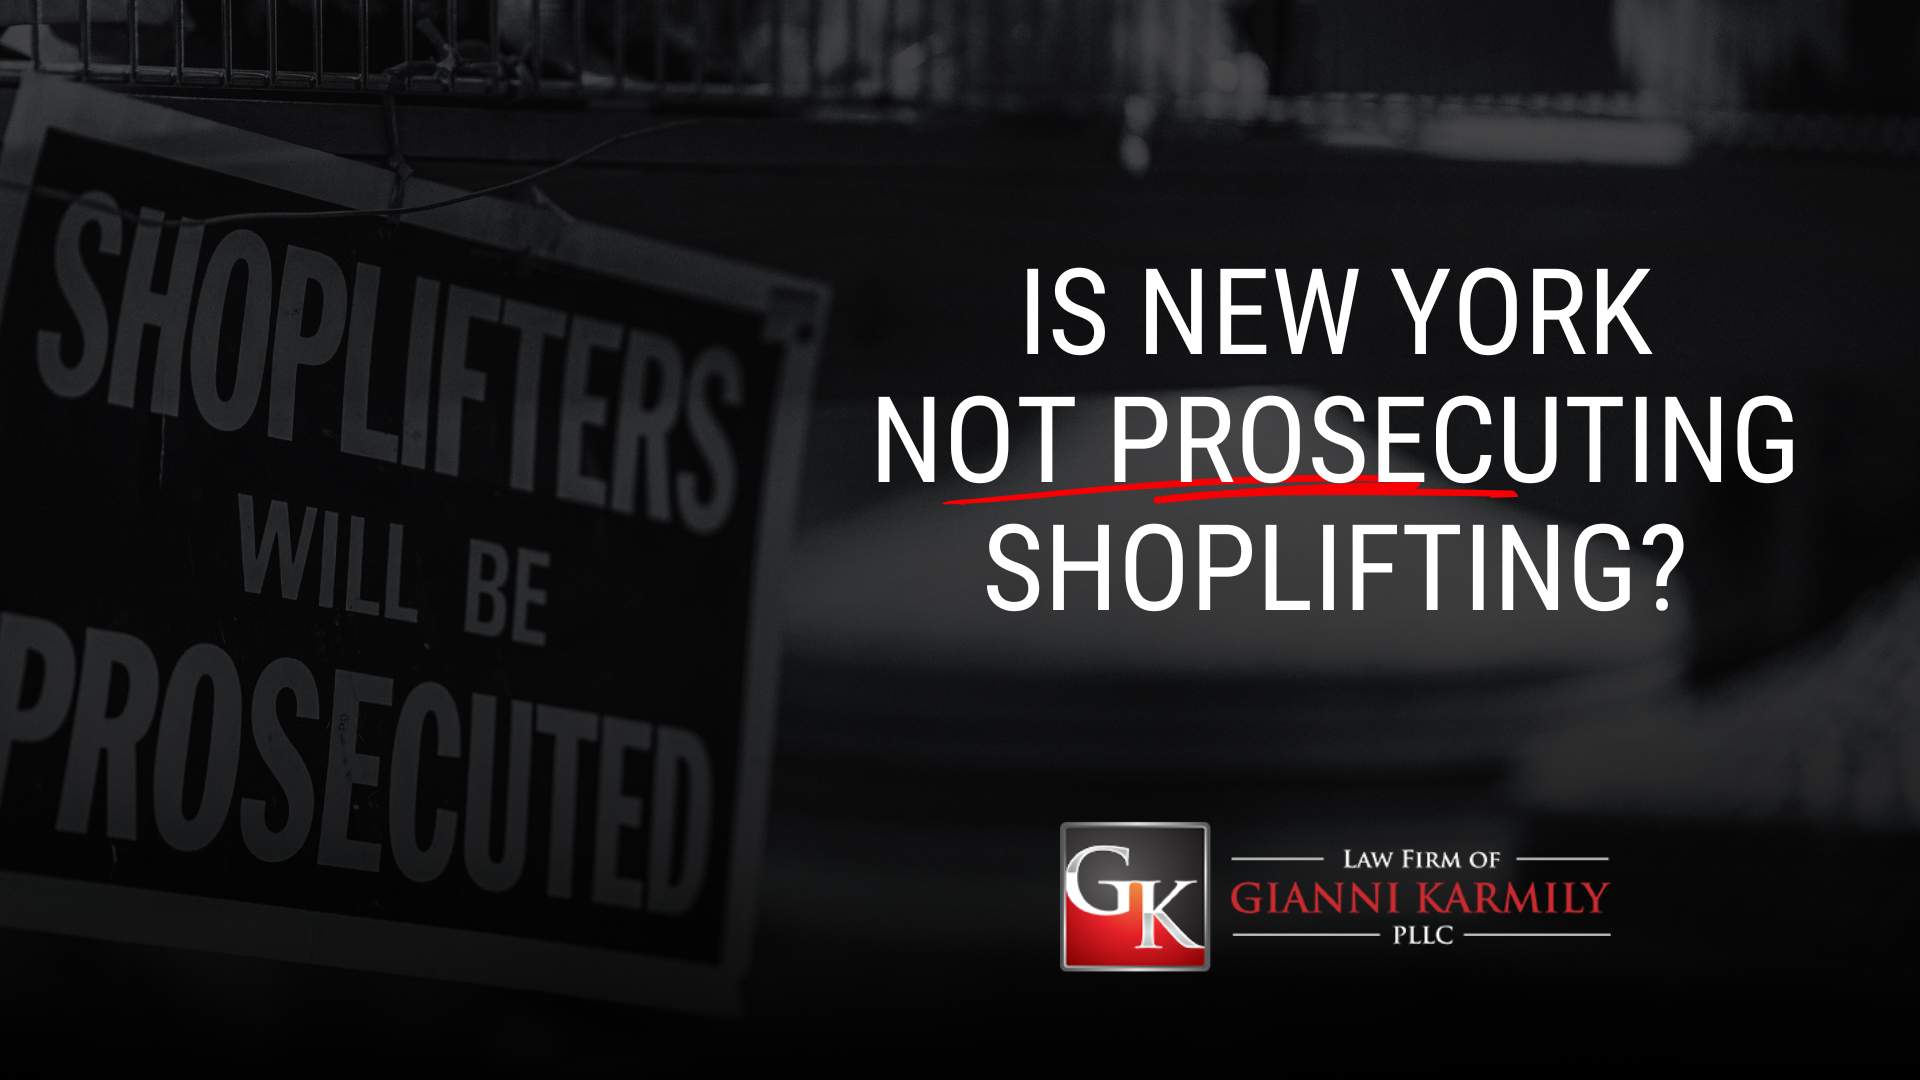 Why is New York Not Prosecuting Shoplifting